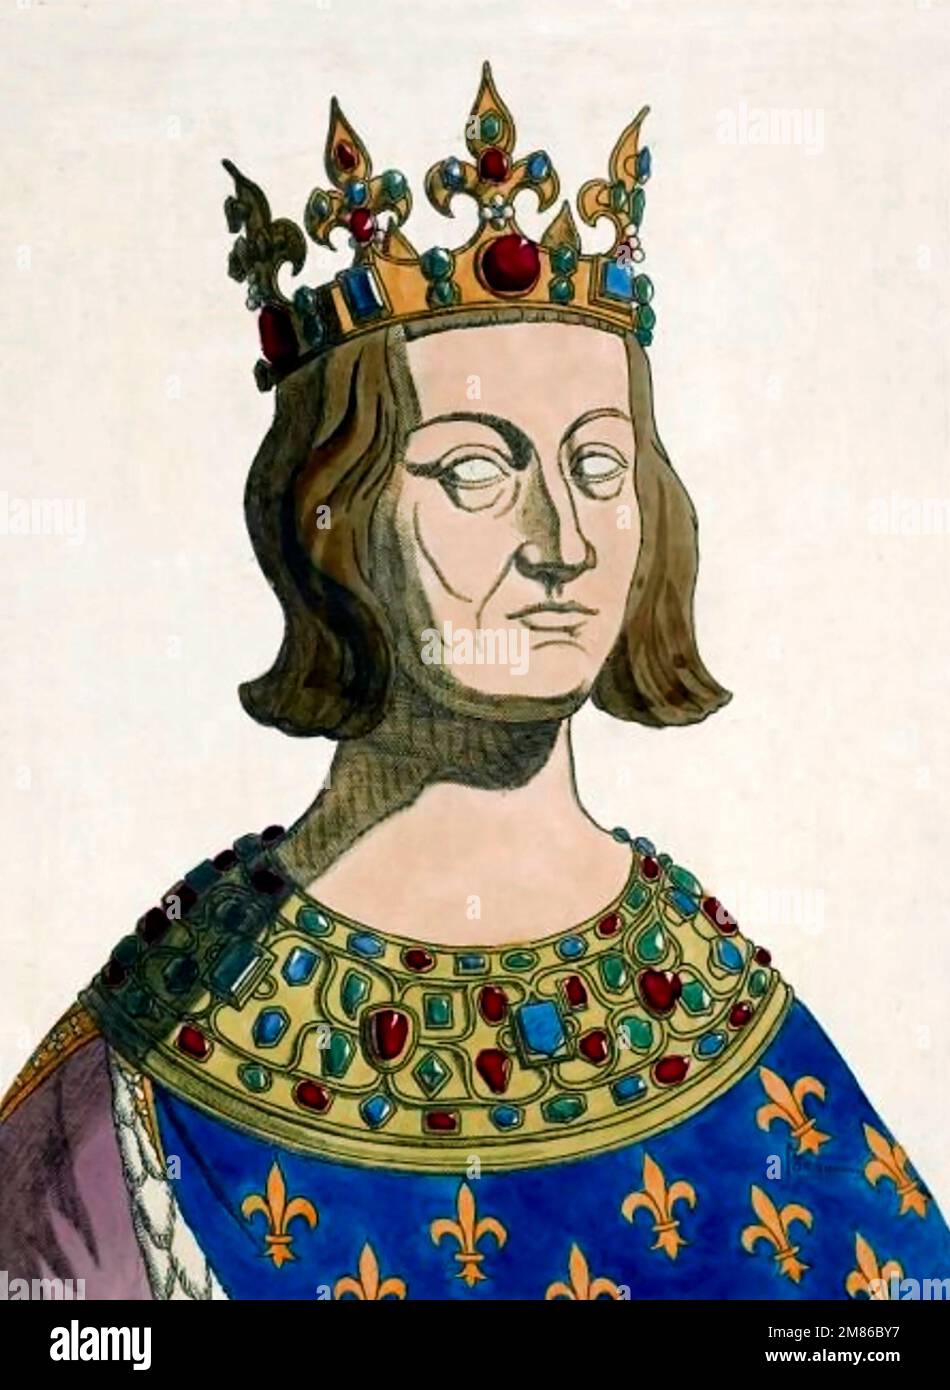 Louis IX (1214-1270). Hand coloured etching of King Louis IX of France after a gold reliquary of Sainte Chapel in Paris, destroyed in 1793. Stock Photo